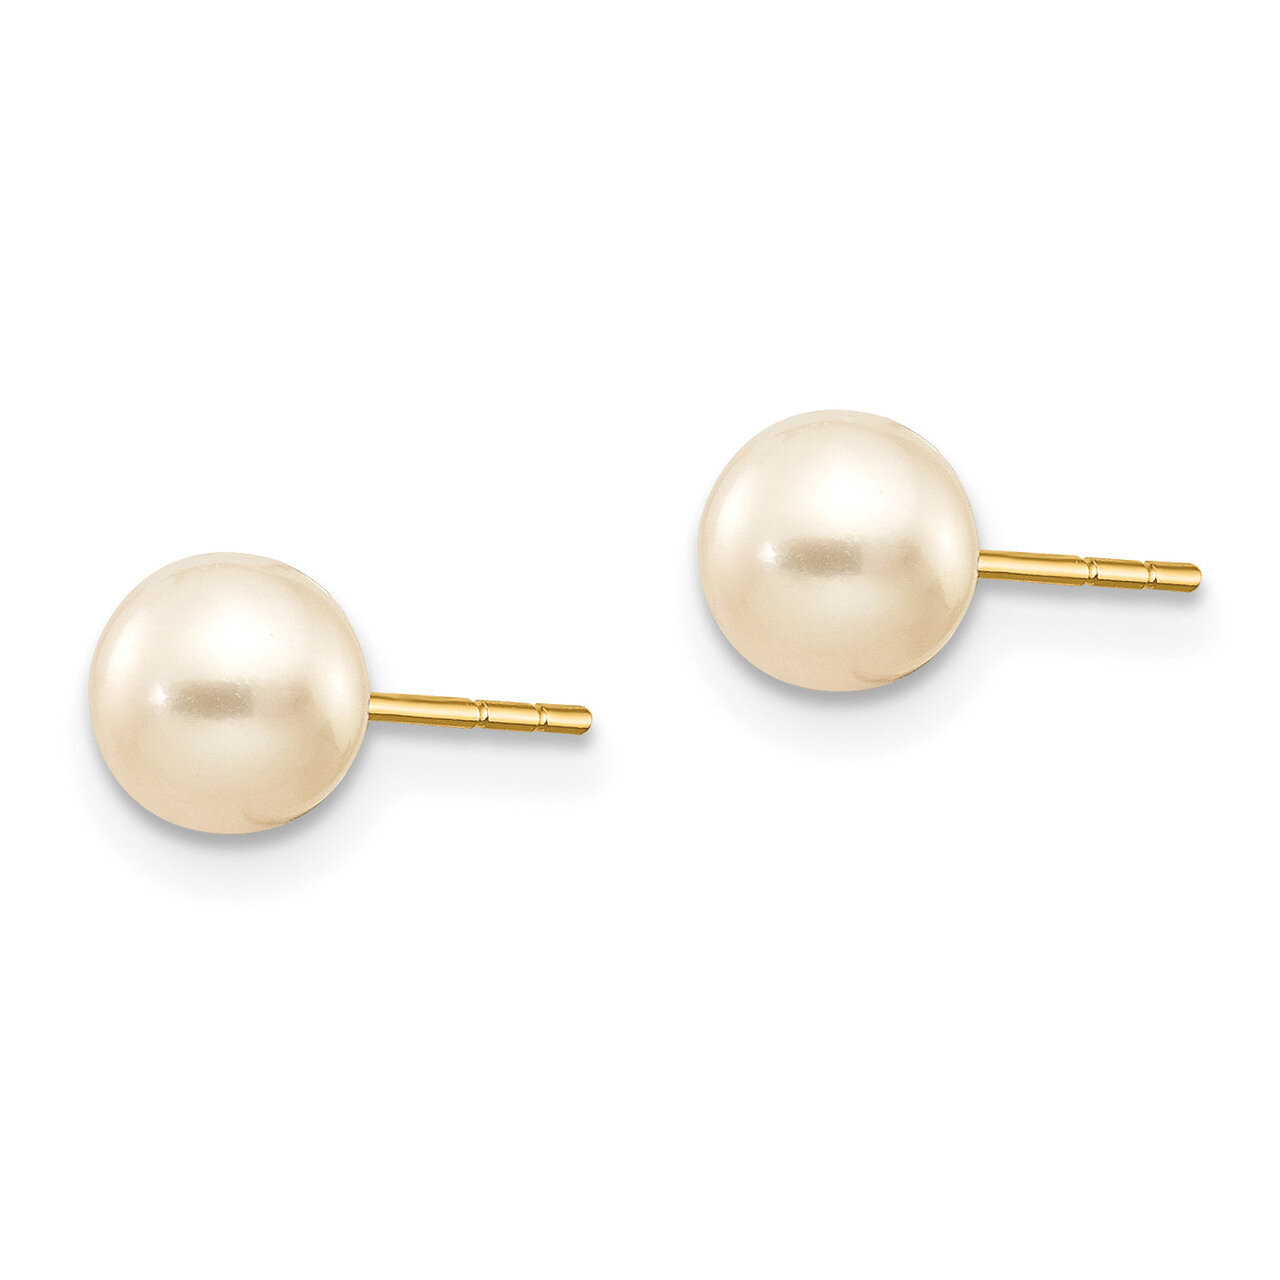 5mm Button Fresh Water Cultured Pearl Earrings - 14k Gold GK416